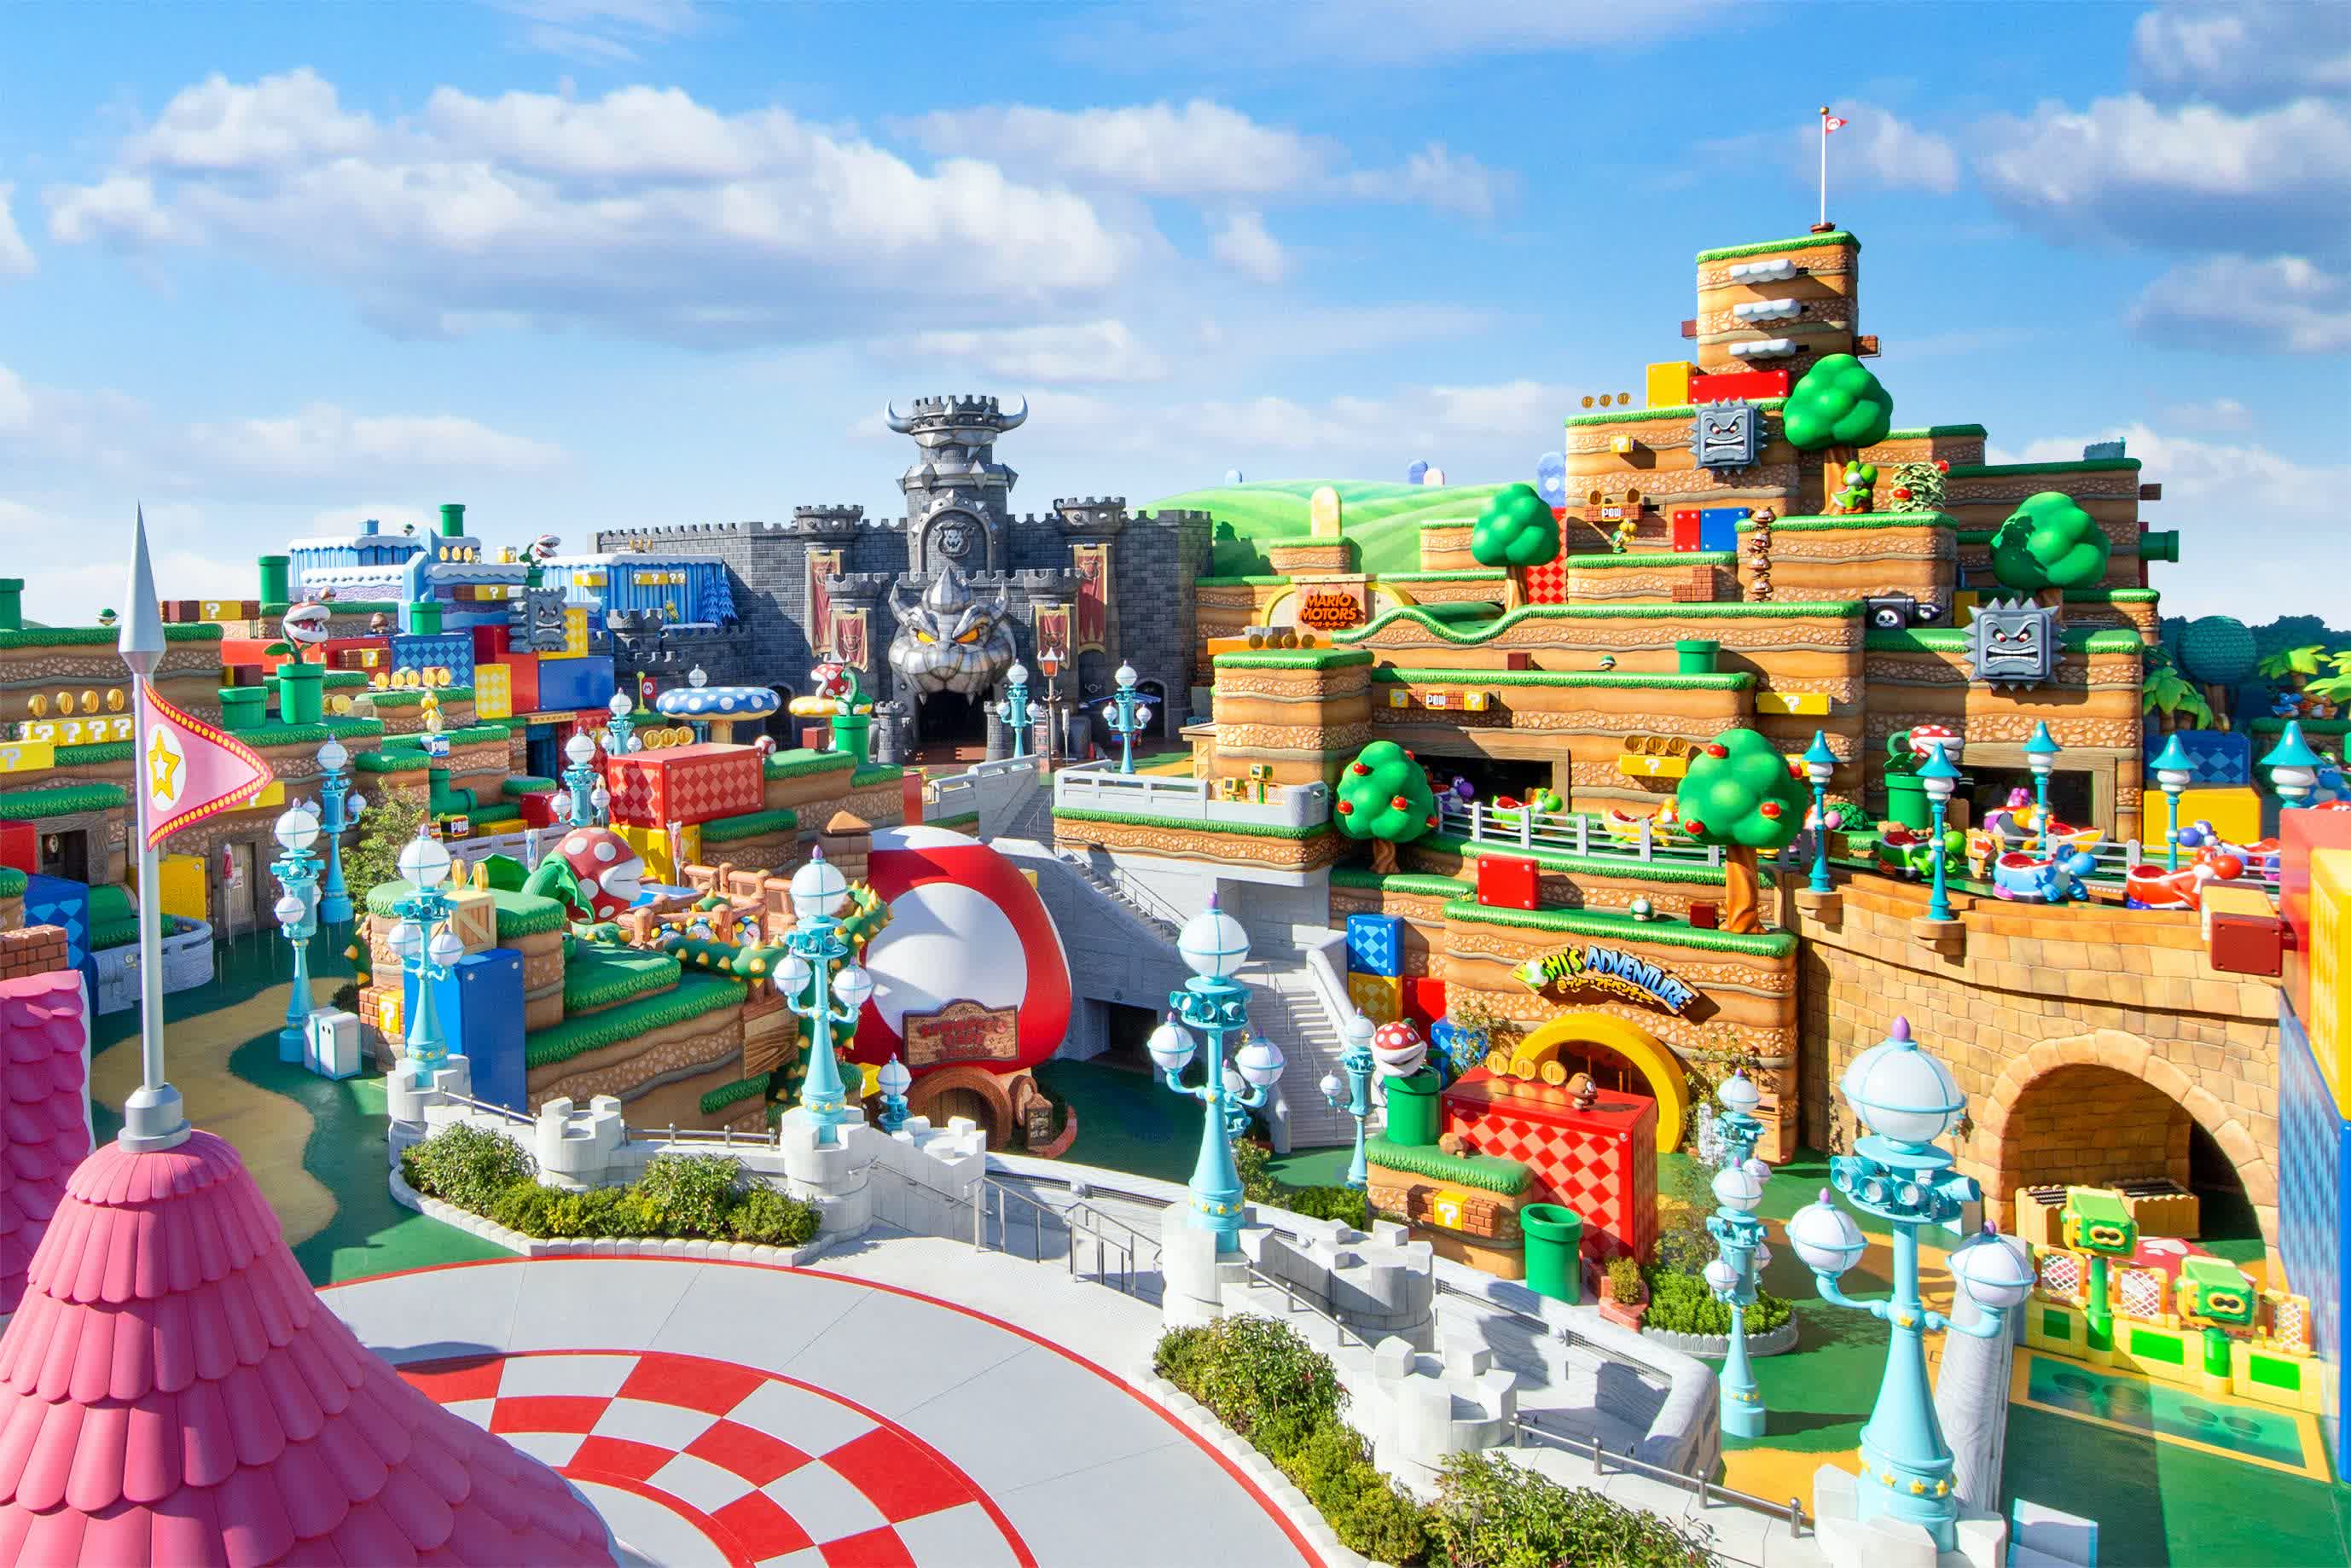 Nintendo's Mario theme park zone opening delayed again due to Covid-19